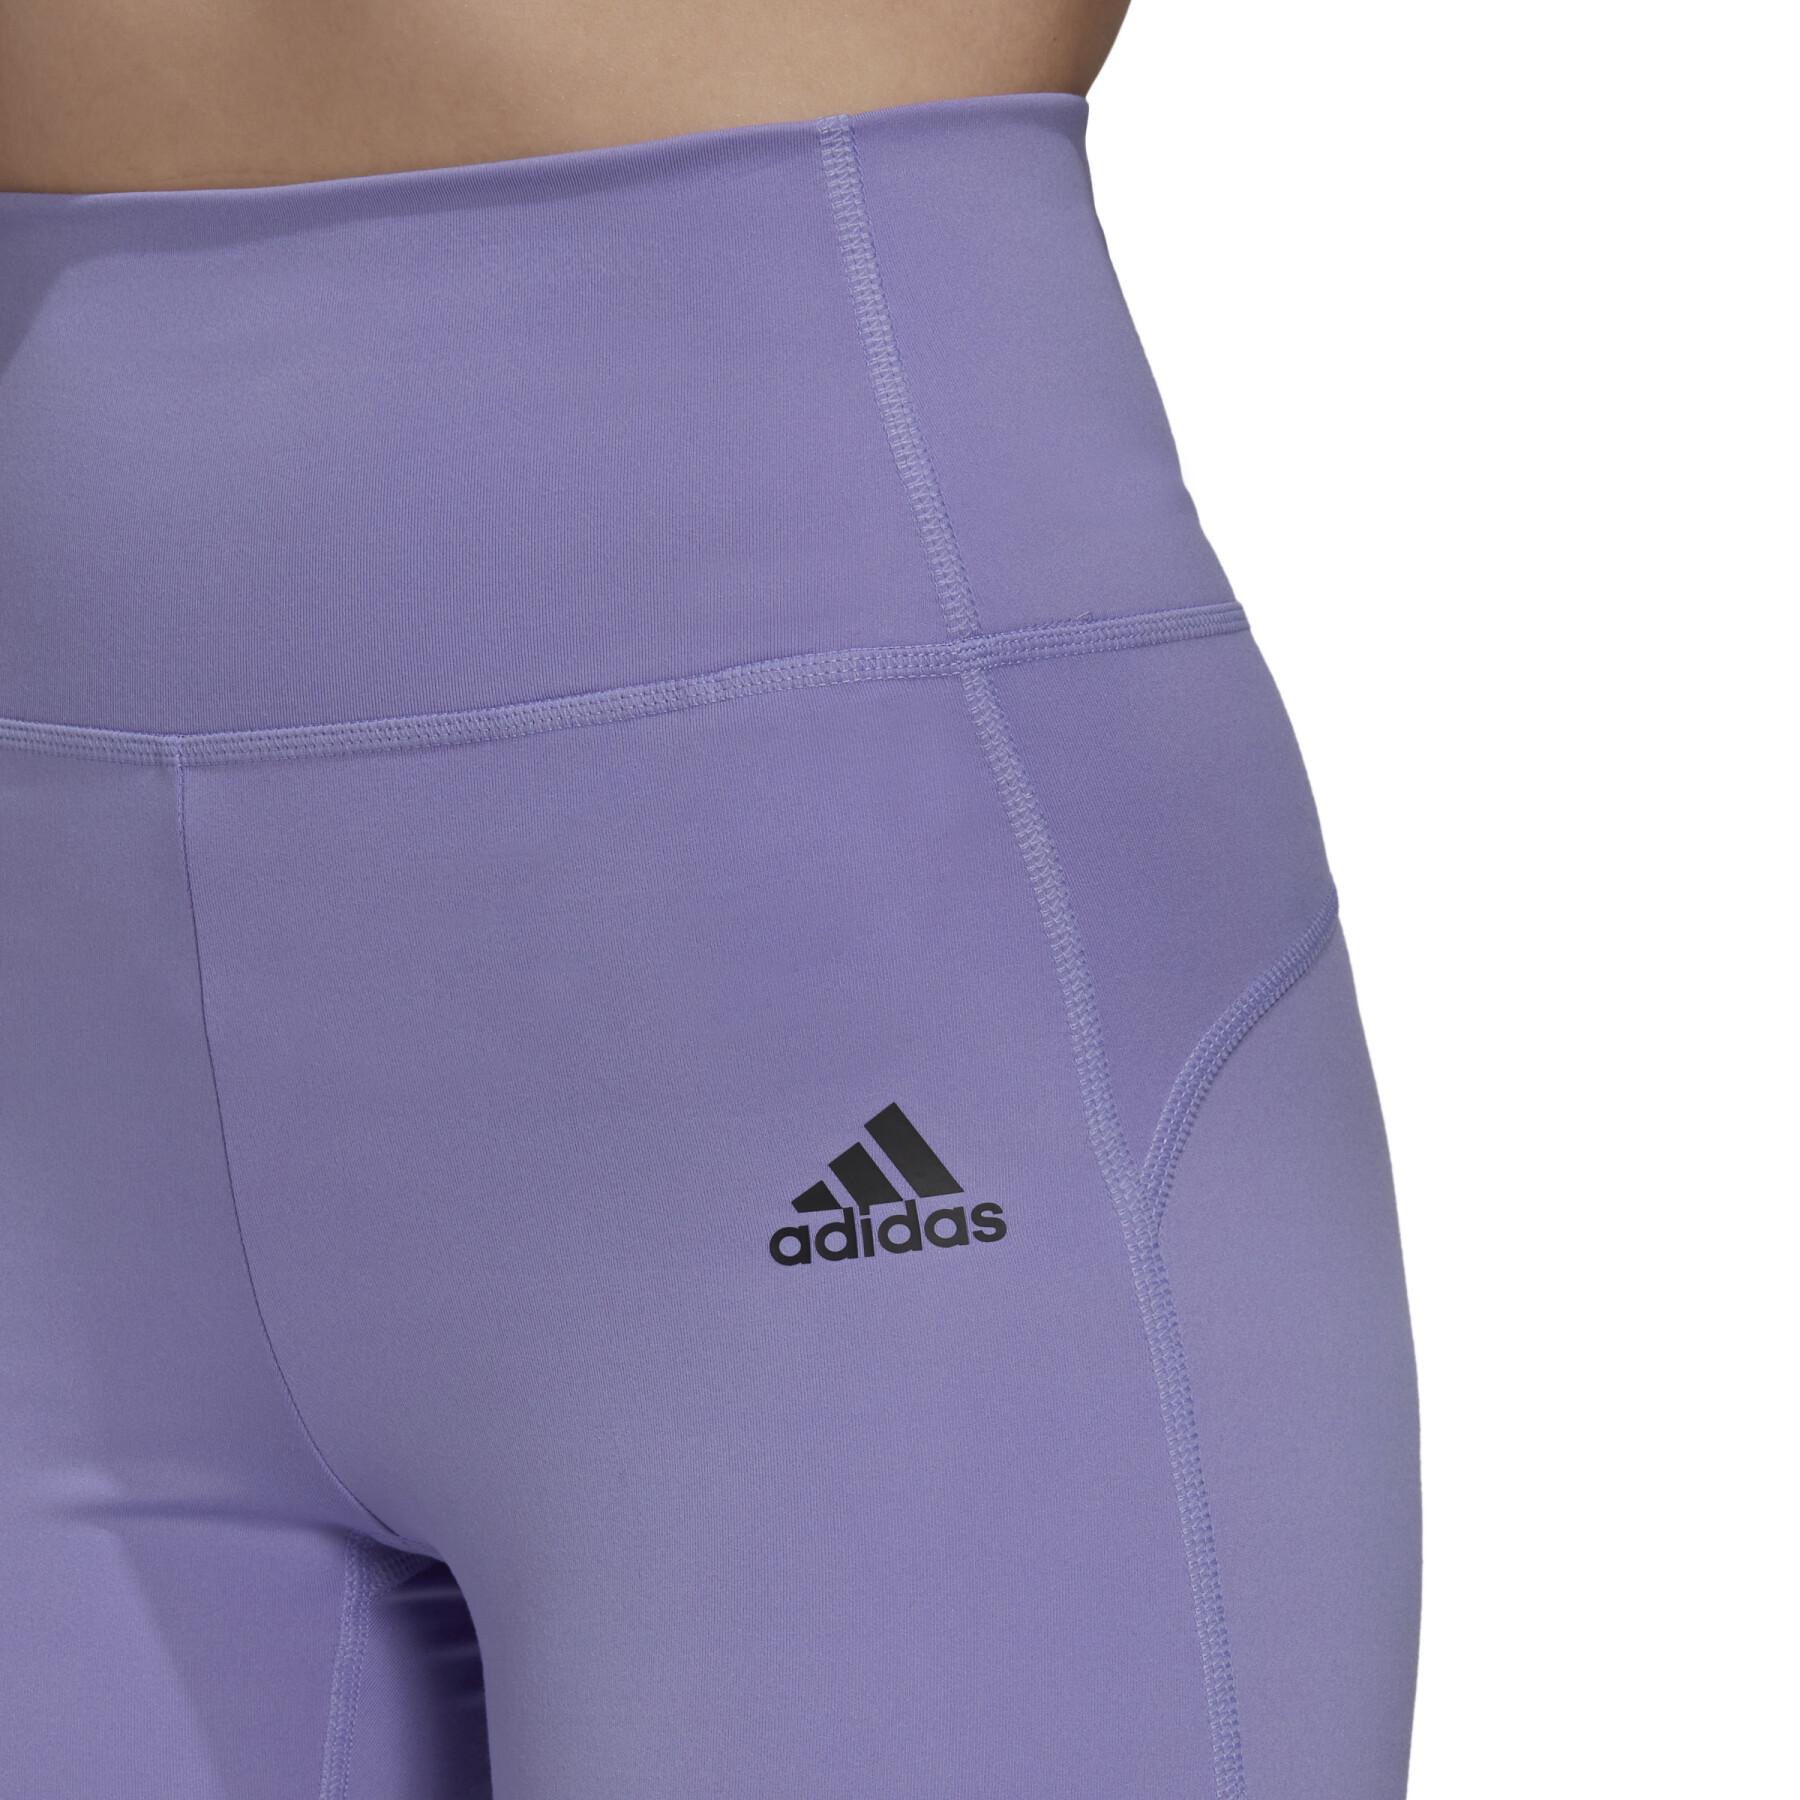 Women's thigh-high boots adidas FeelBrilliant Designed to Move